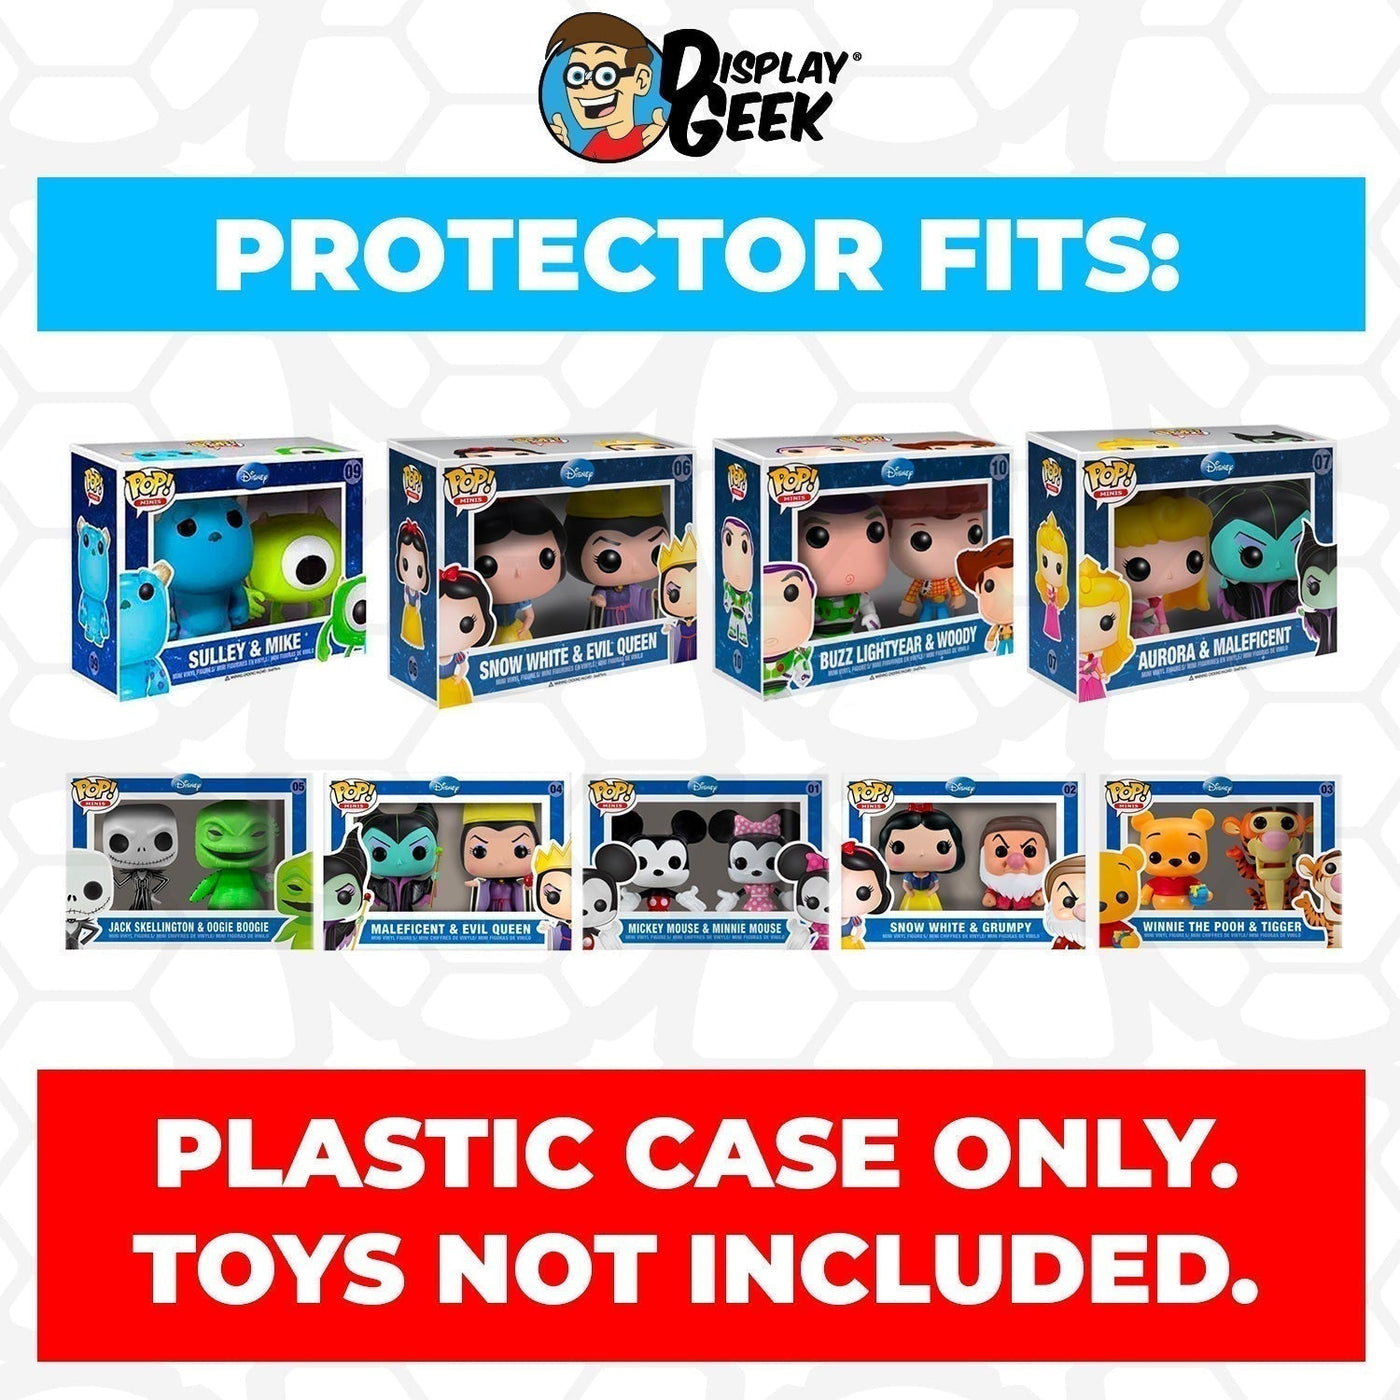 Pop Protector for 2 Pack Mini Winnie the Pooh & Tigger #03 Funko Pop on The Protector Guide App by Display Geek